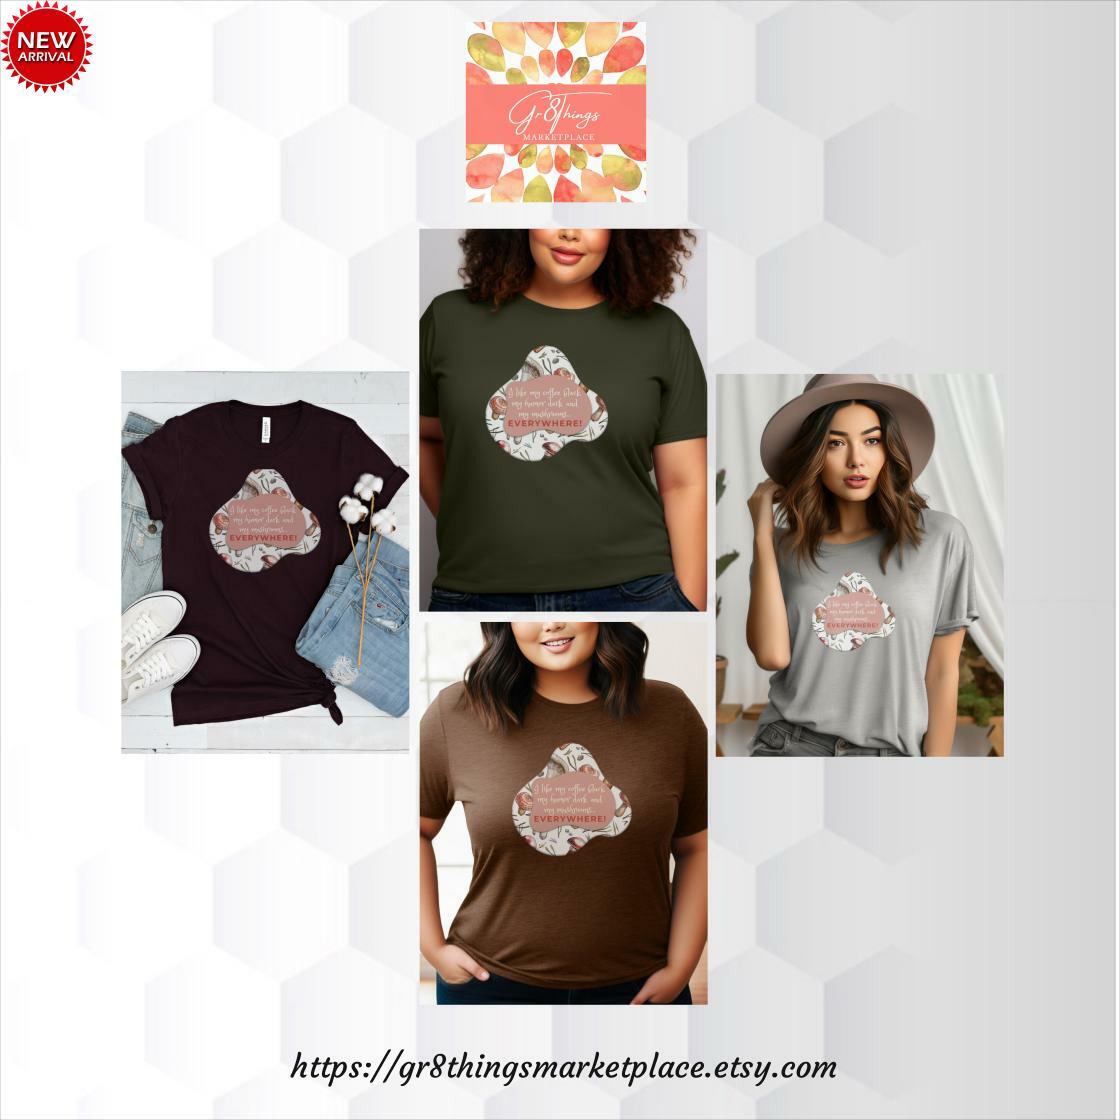 Exclusive deal alert! I like my mushrooms everywhere T-Shirt, Cottagecore Chic Tee, Naturecore Boho Wear, Nature and Botanical Gift, Green Witch, Goblincore, available for a limited time at the incredible price of $22.99
gr8thingsmarketplace.etsy.com/listing/164807…
#WomensGift #MensGift